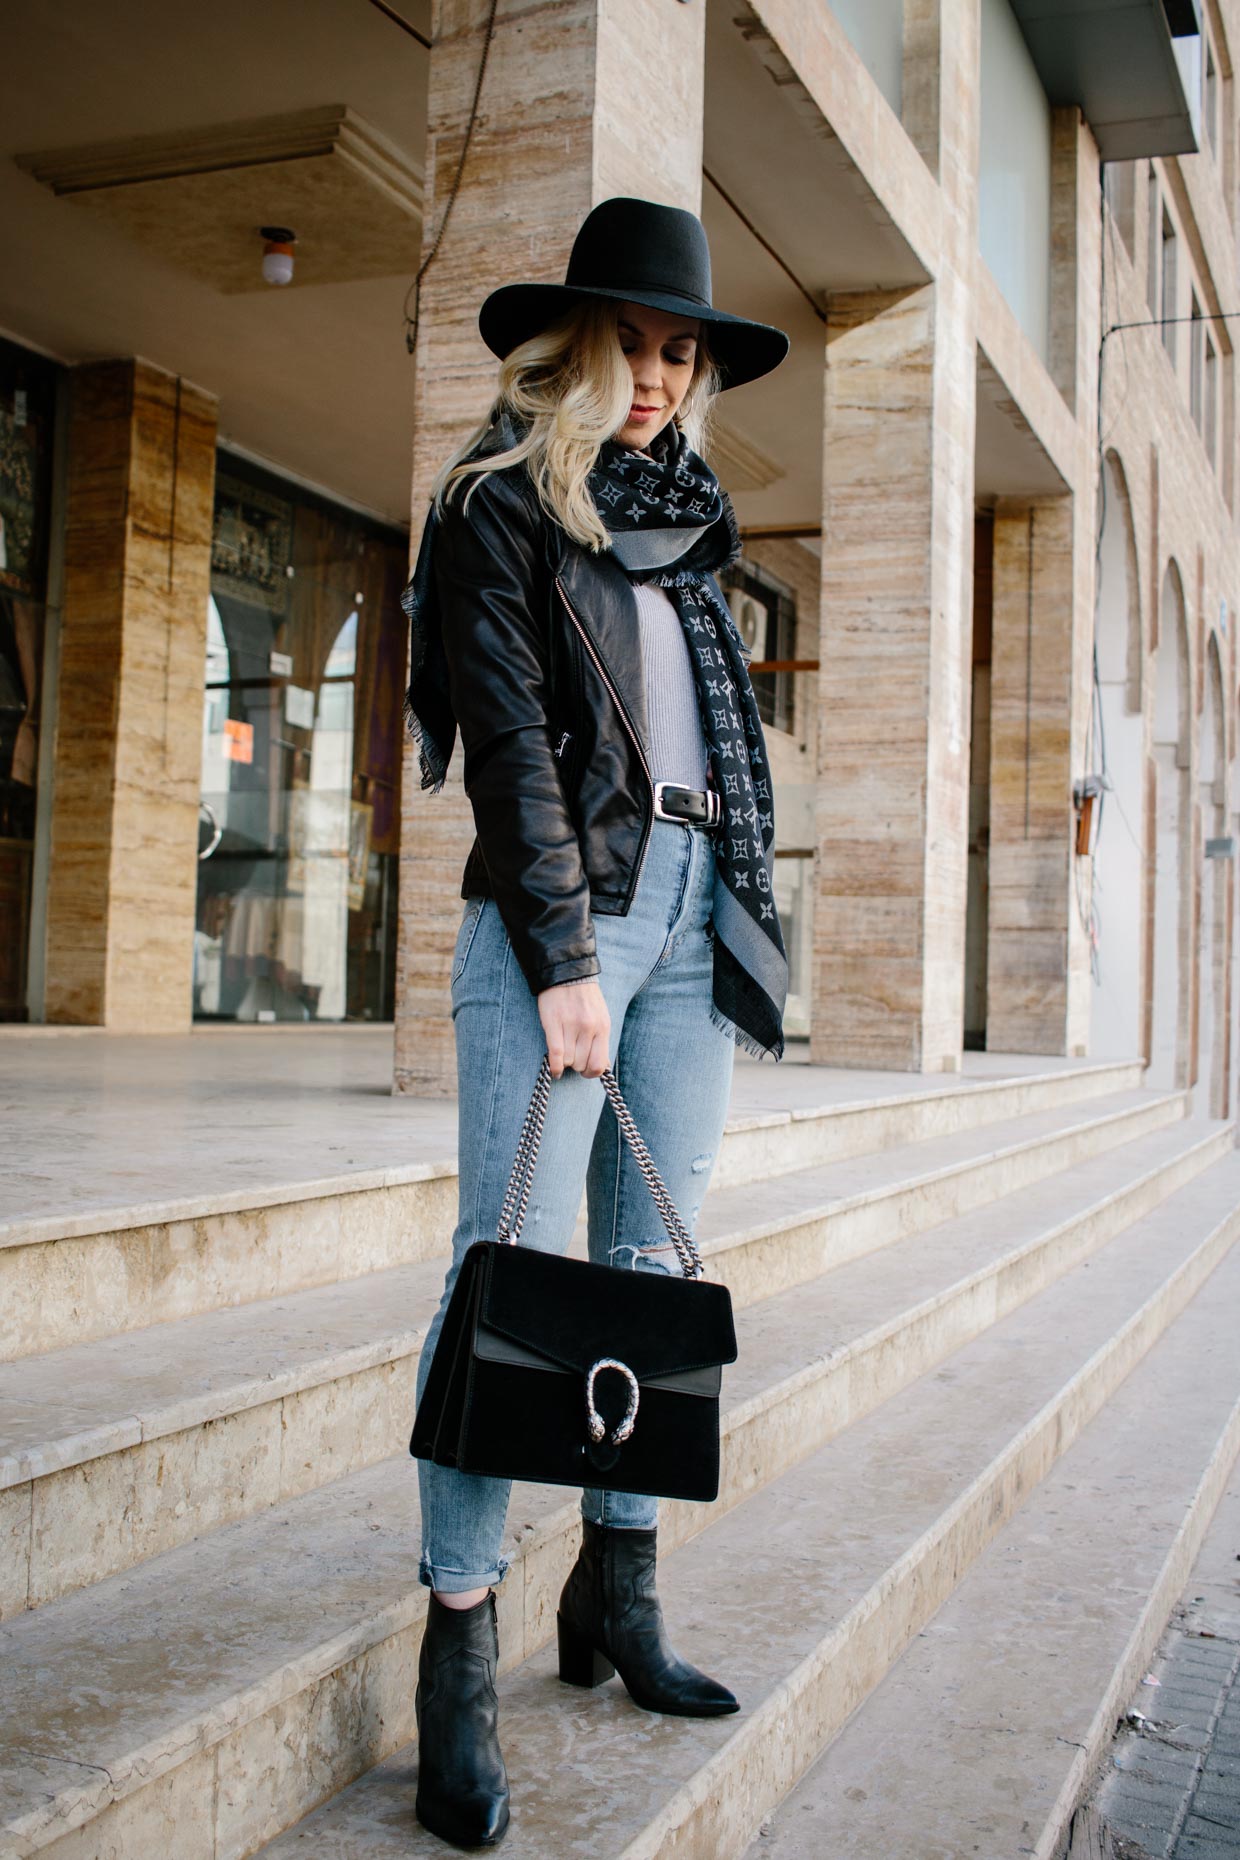 Elegant lady with hat, scarf, boots and Louis Vuitton bag